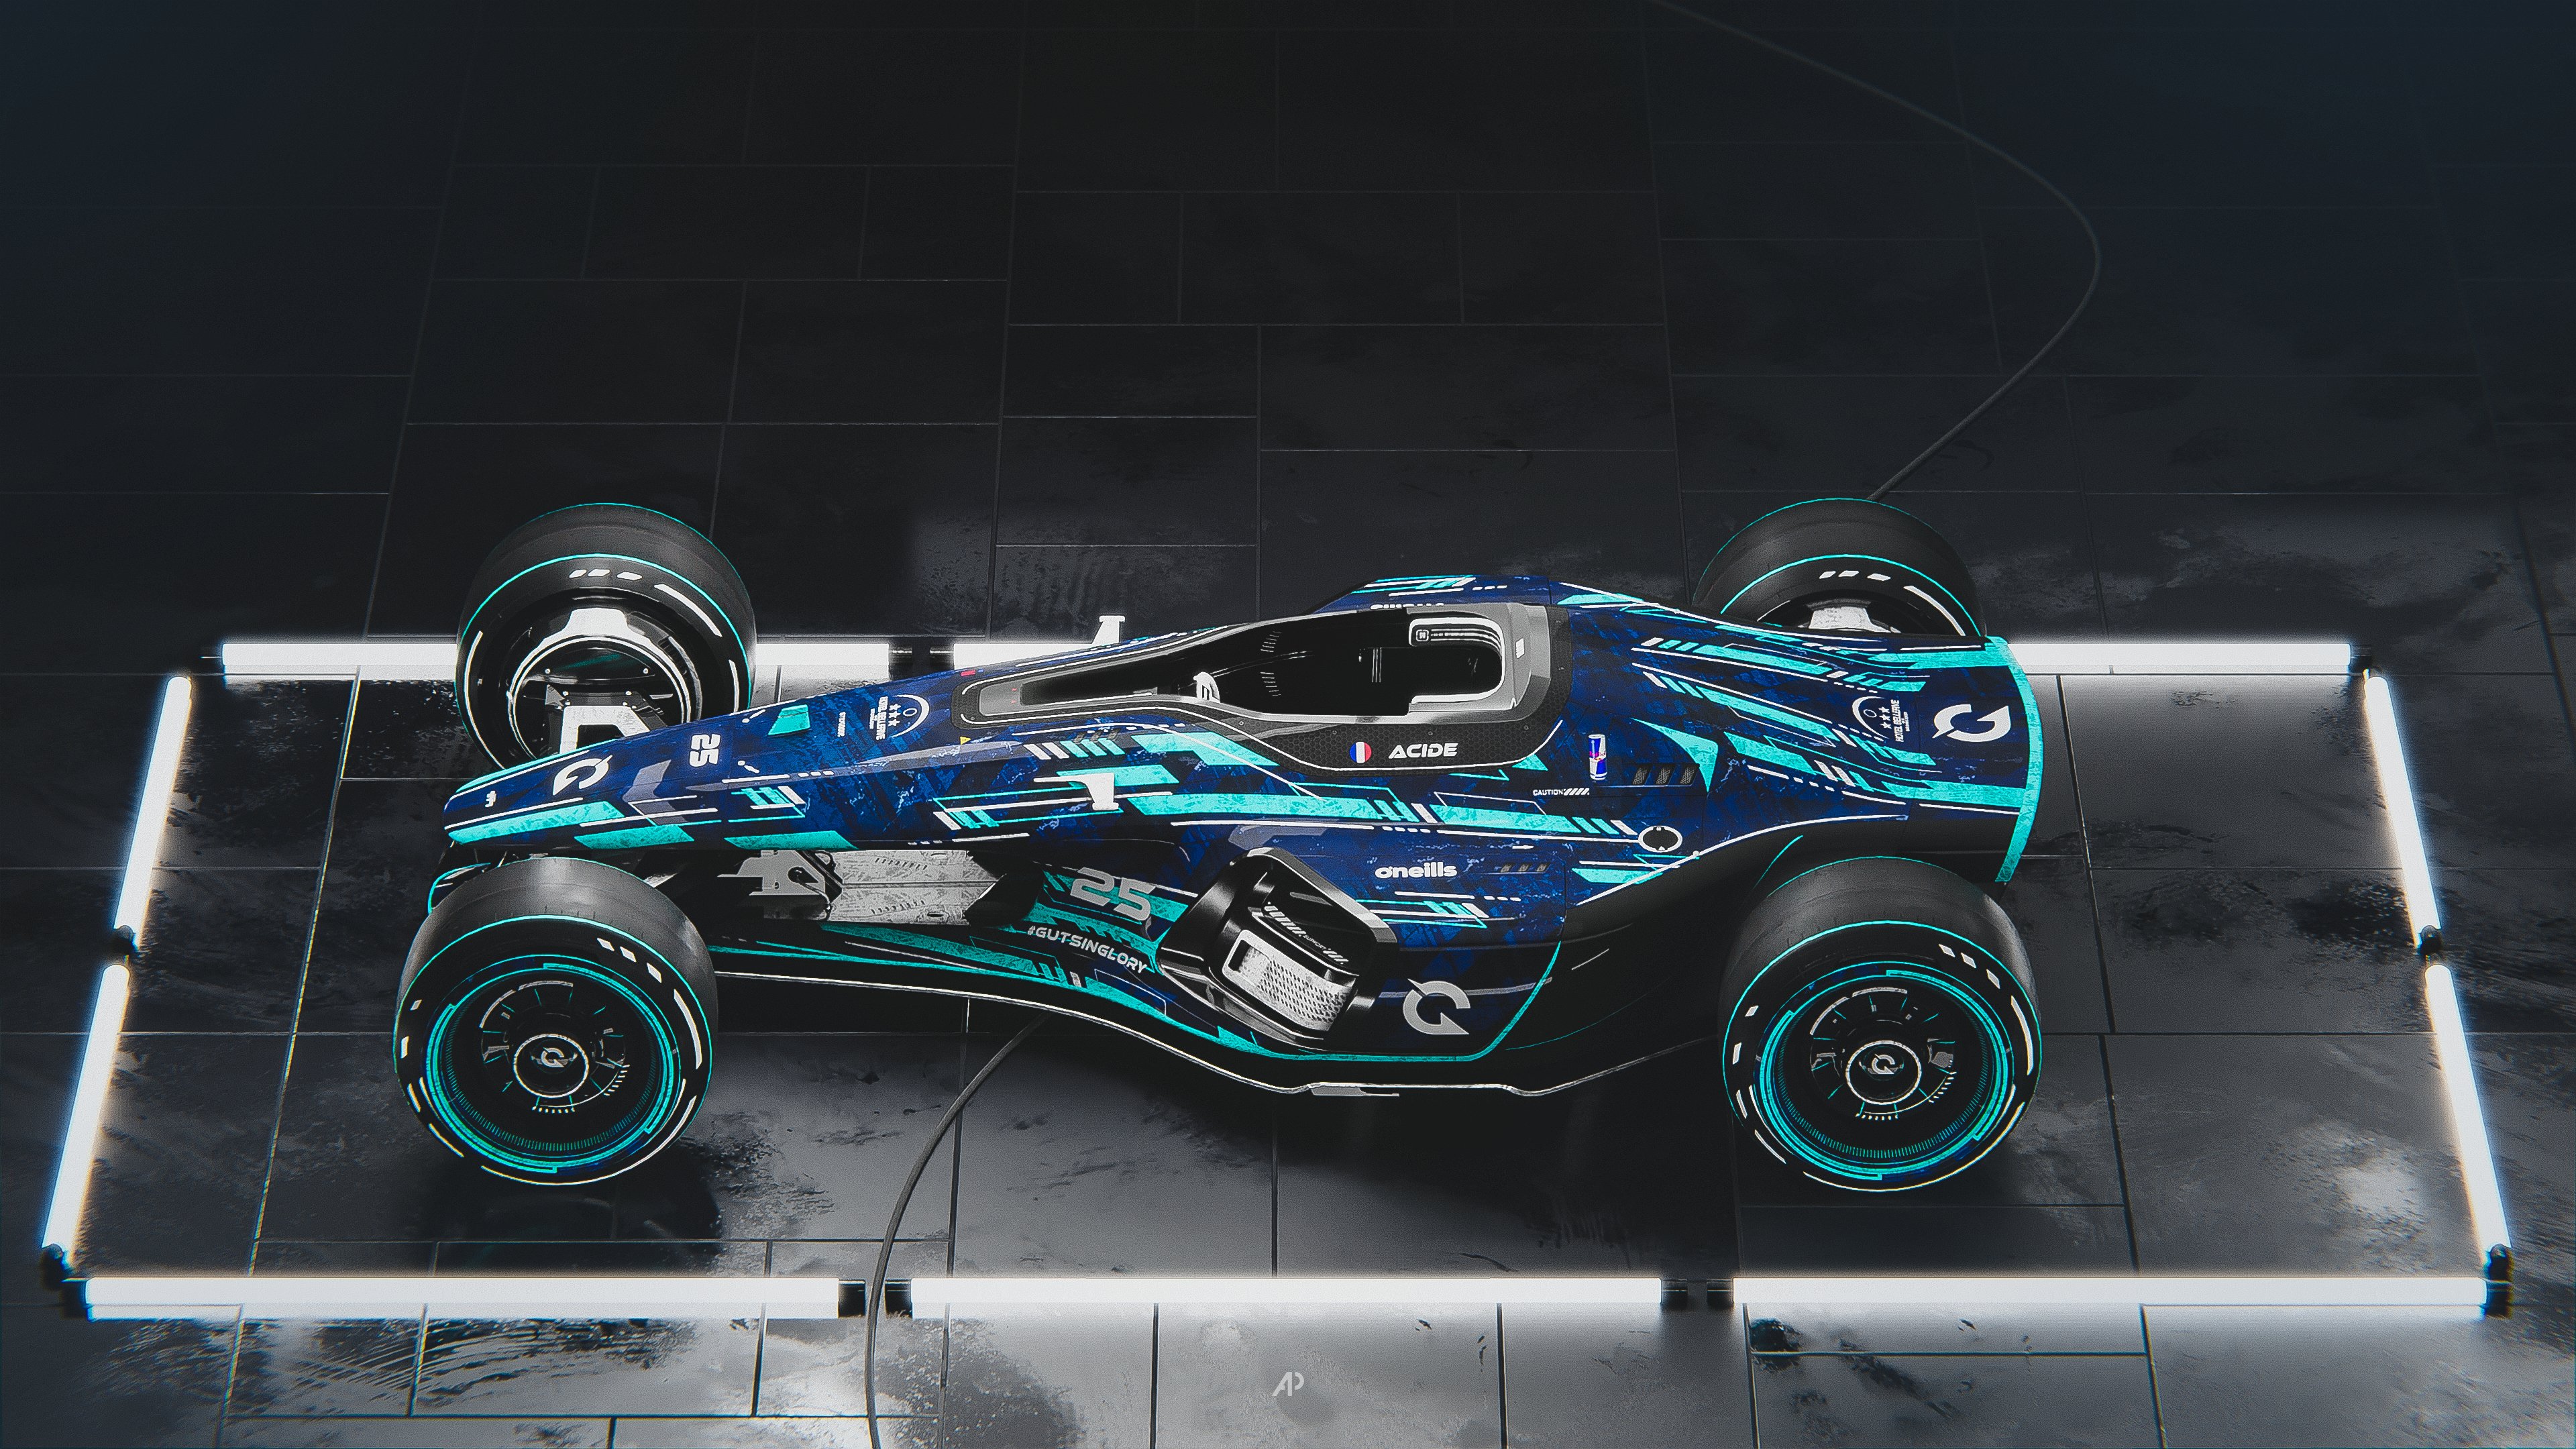 Glorious Esport 2022 skin used by Acide in Final of the ZrT Trackmania Cup 2022